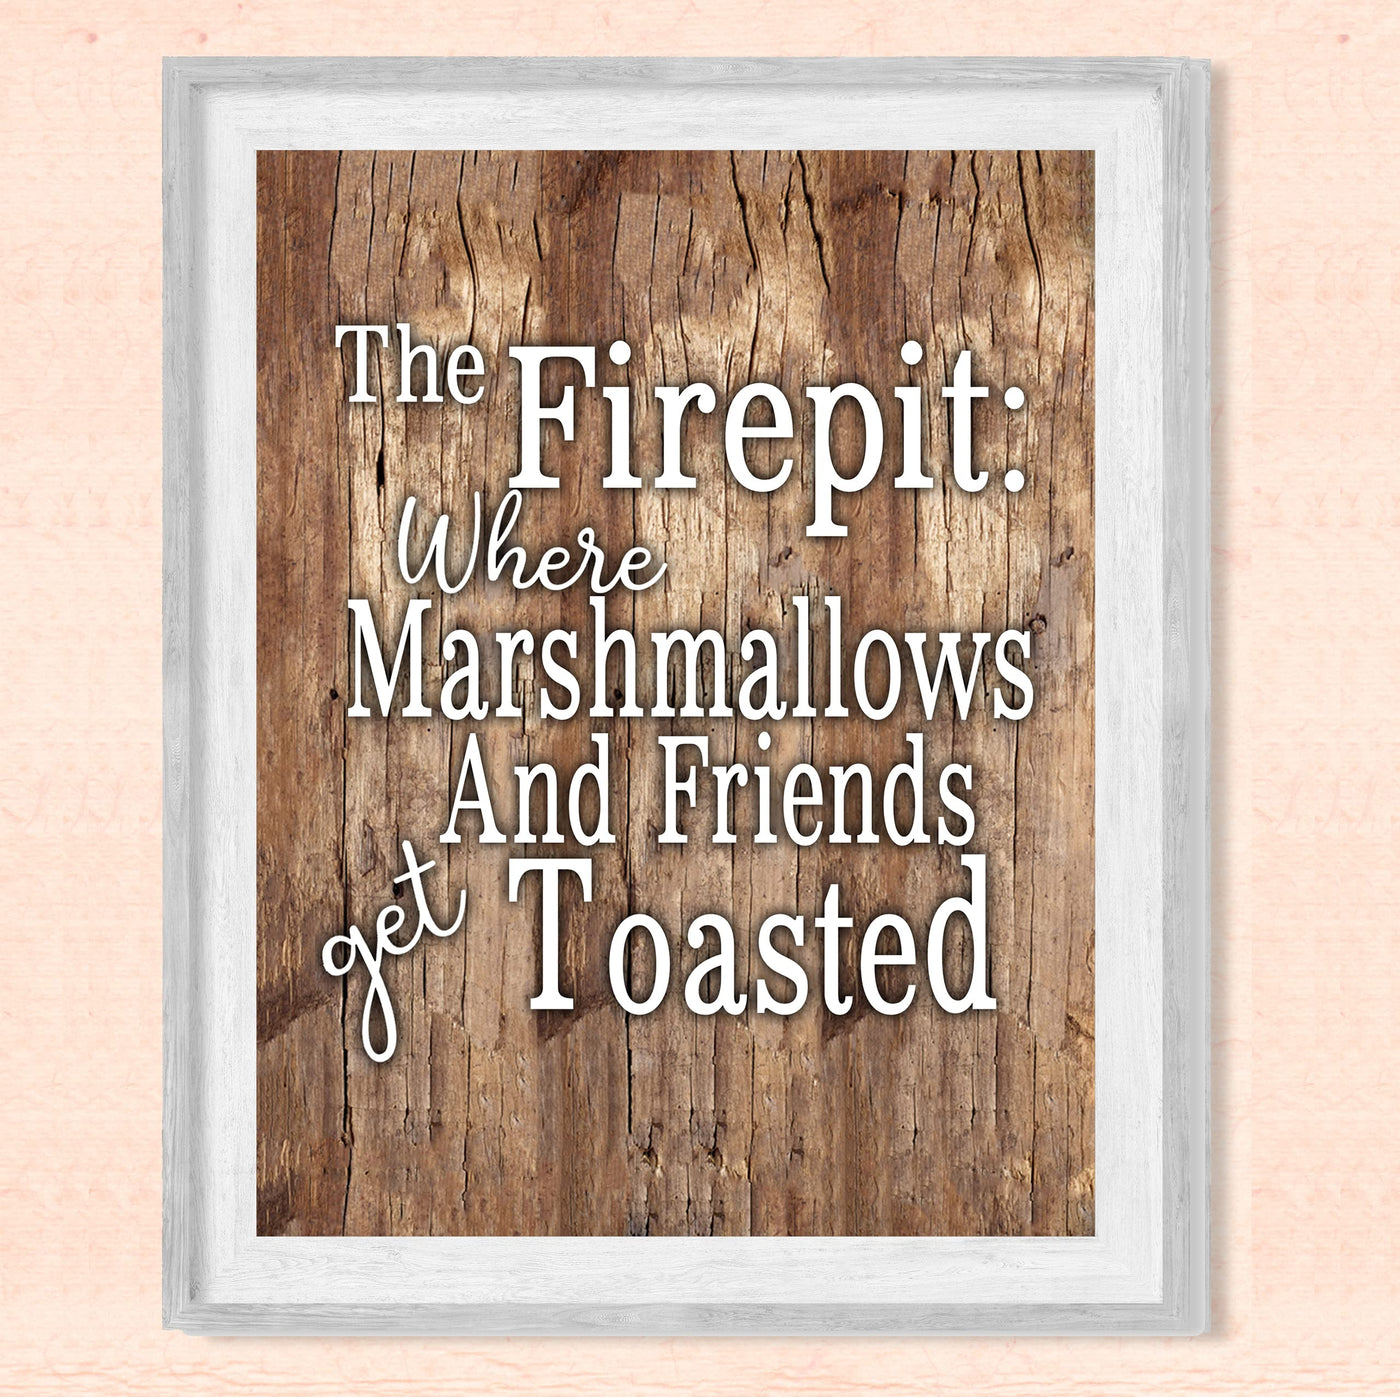 Welcome to Our Fire Pit -Get Toasted- Funny Backyard Outdoors Sign -8 x 10" Retro Camp Wall Art Print -Ready to Frame. Rustic Home-Patio-Deck Decor. Perfect Decoration for the Cabin-Lodge!